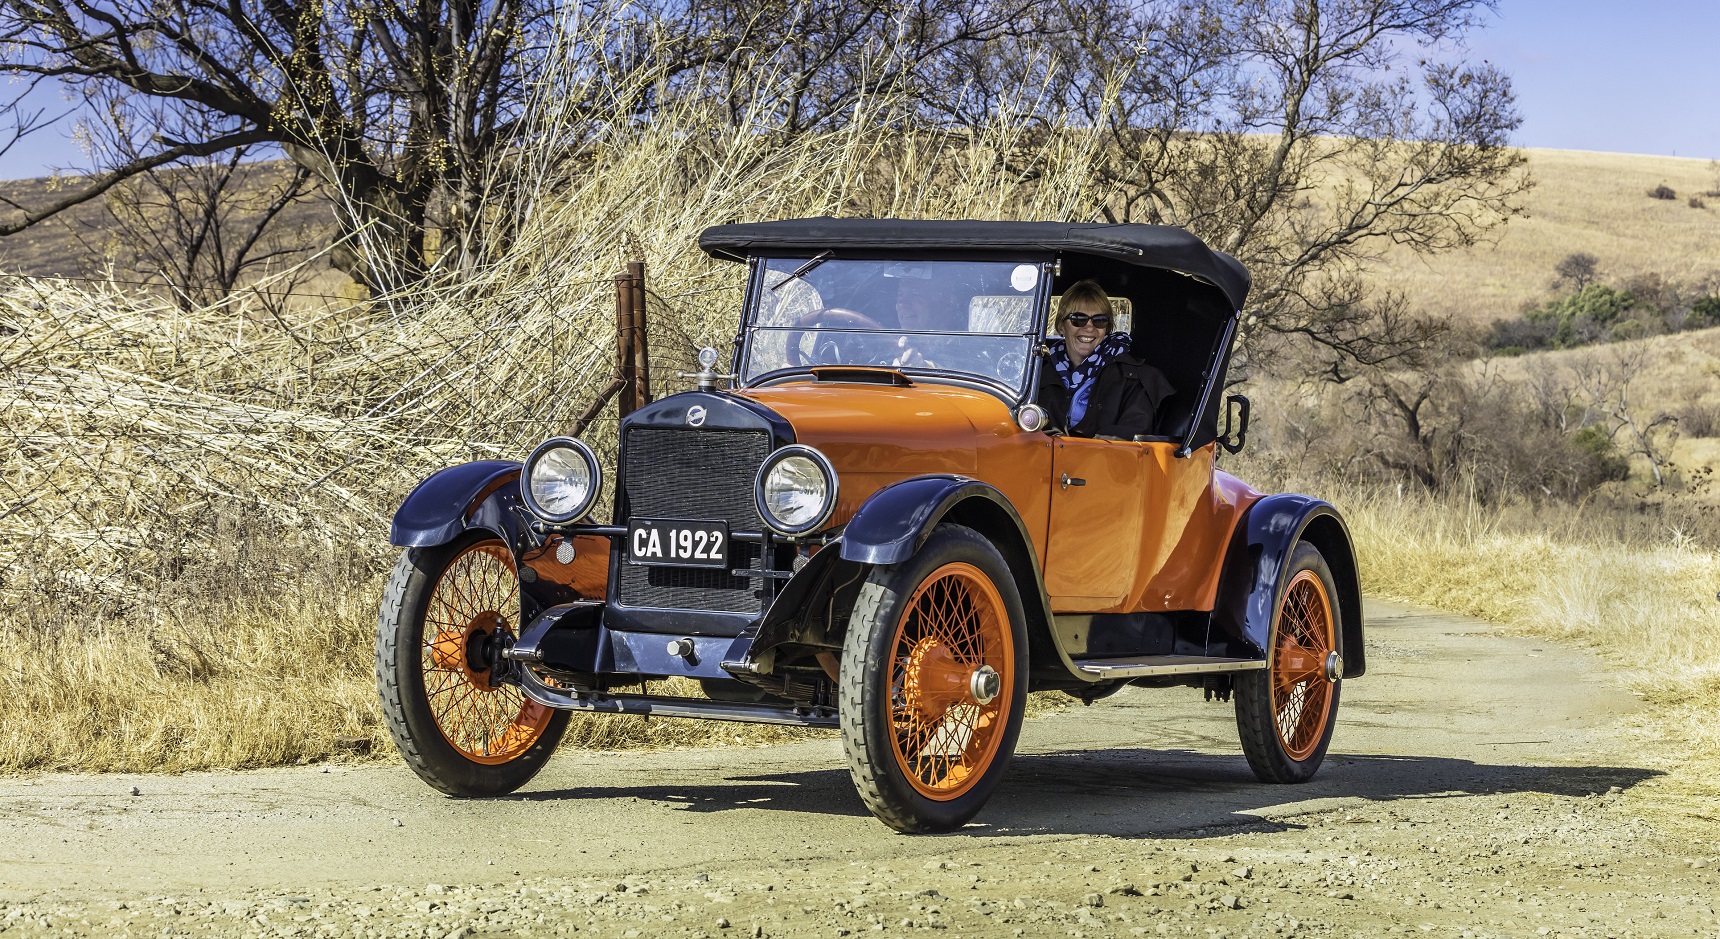 A 1914 Studebaker on a dirt track.